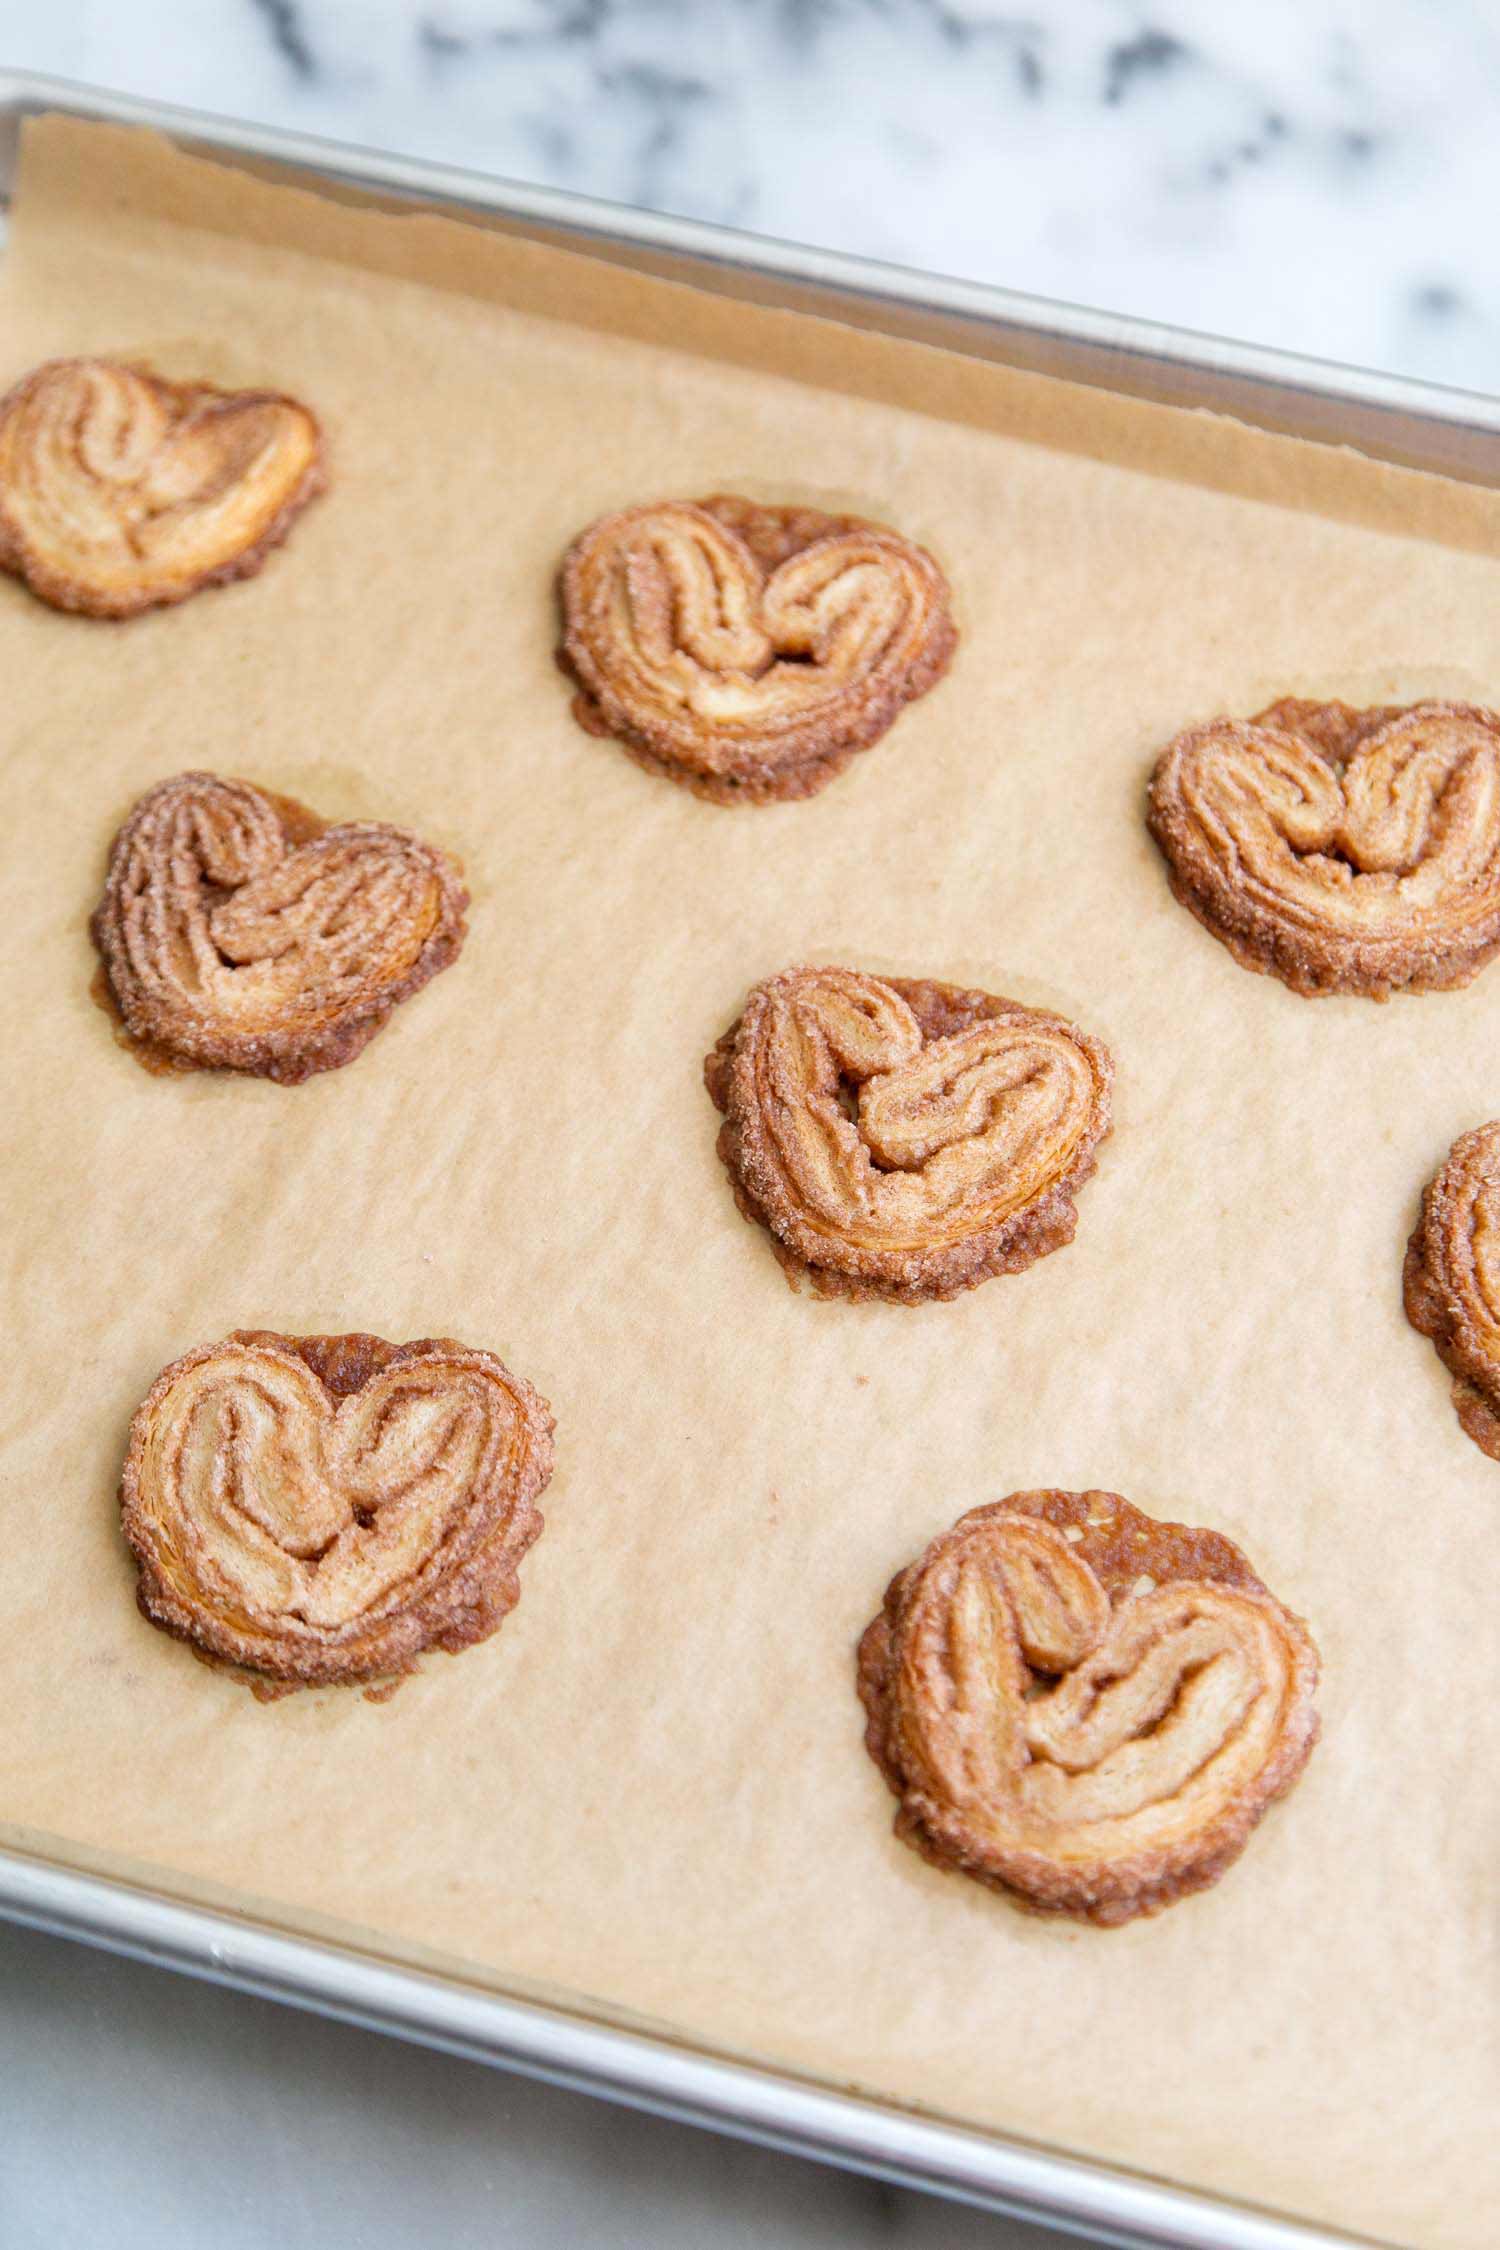 Cinnamon Sugar Palmiers. During baking, the frozen cookies will spread out and form little hearts. #cinnamonsugar #cookies #palmiers #easyrecipe